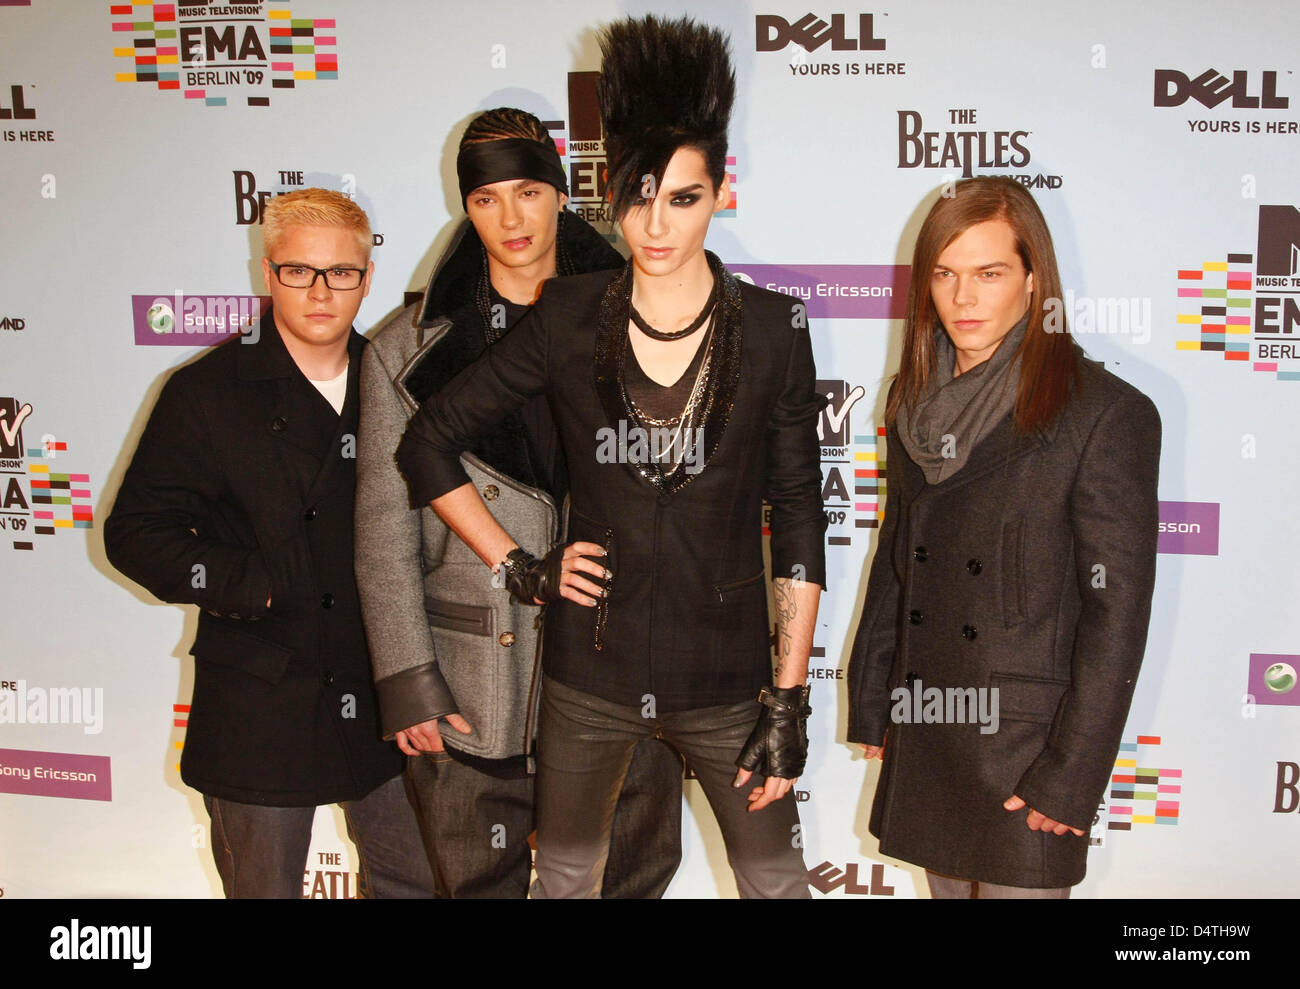 Gustav Schaefer (L-R), Tom Kaulitz, Bill Kaulitz and Georg Listing, members of the German band ?Tokio Hotel?, pose on the red carpet at the MTV Europe Music Awards at O2 World in Berlin, Germany, 05 November 2009. MTV chose Berlin for the ceremony as the year 2009 marks the 20th anniversary of the fall of Berlin Wall. Photo: Hubert Boesl Stock Photo